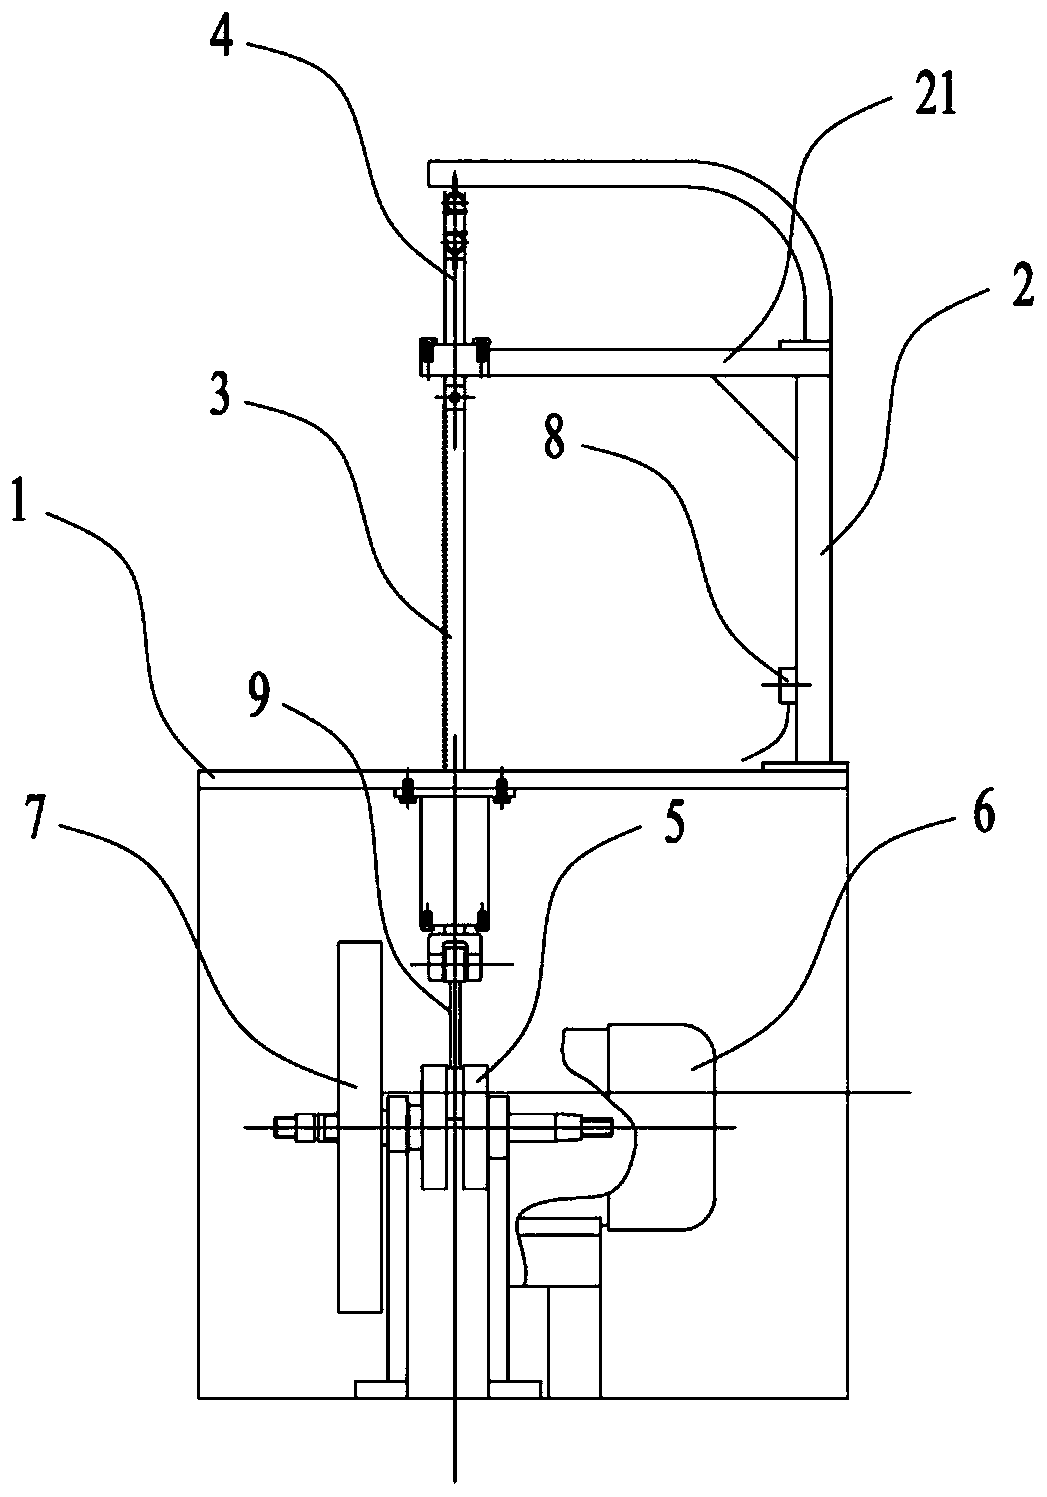 Spring reciprocating cutting device